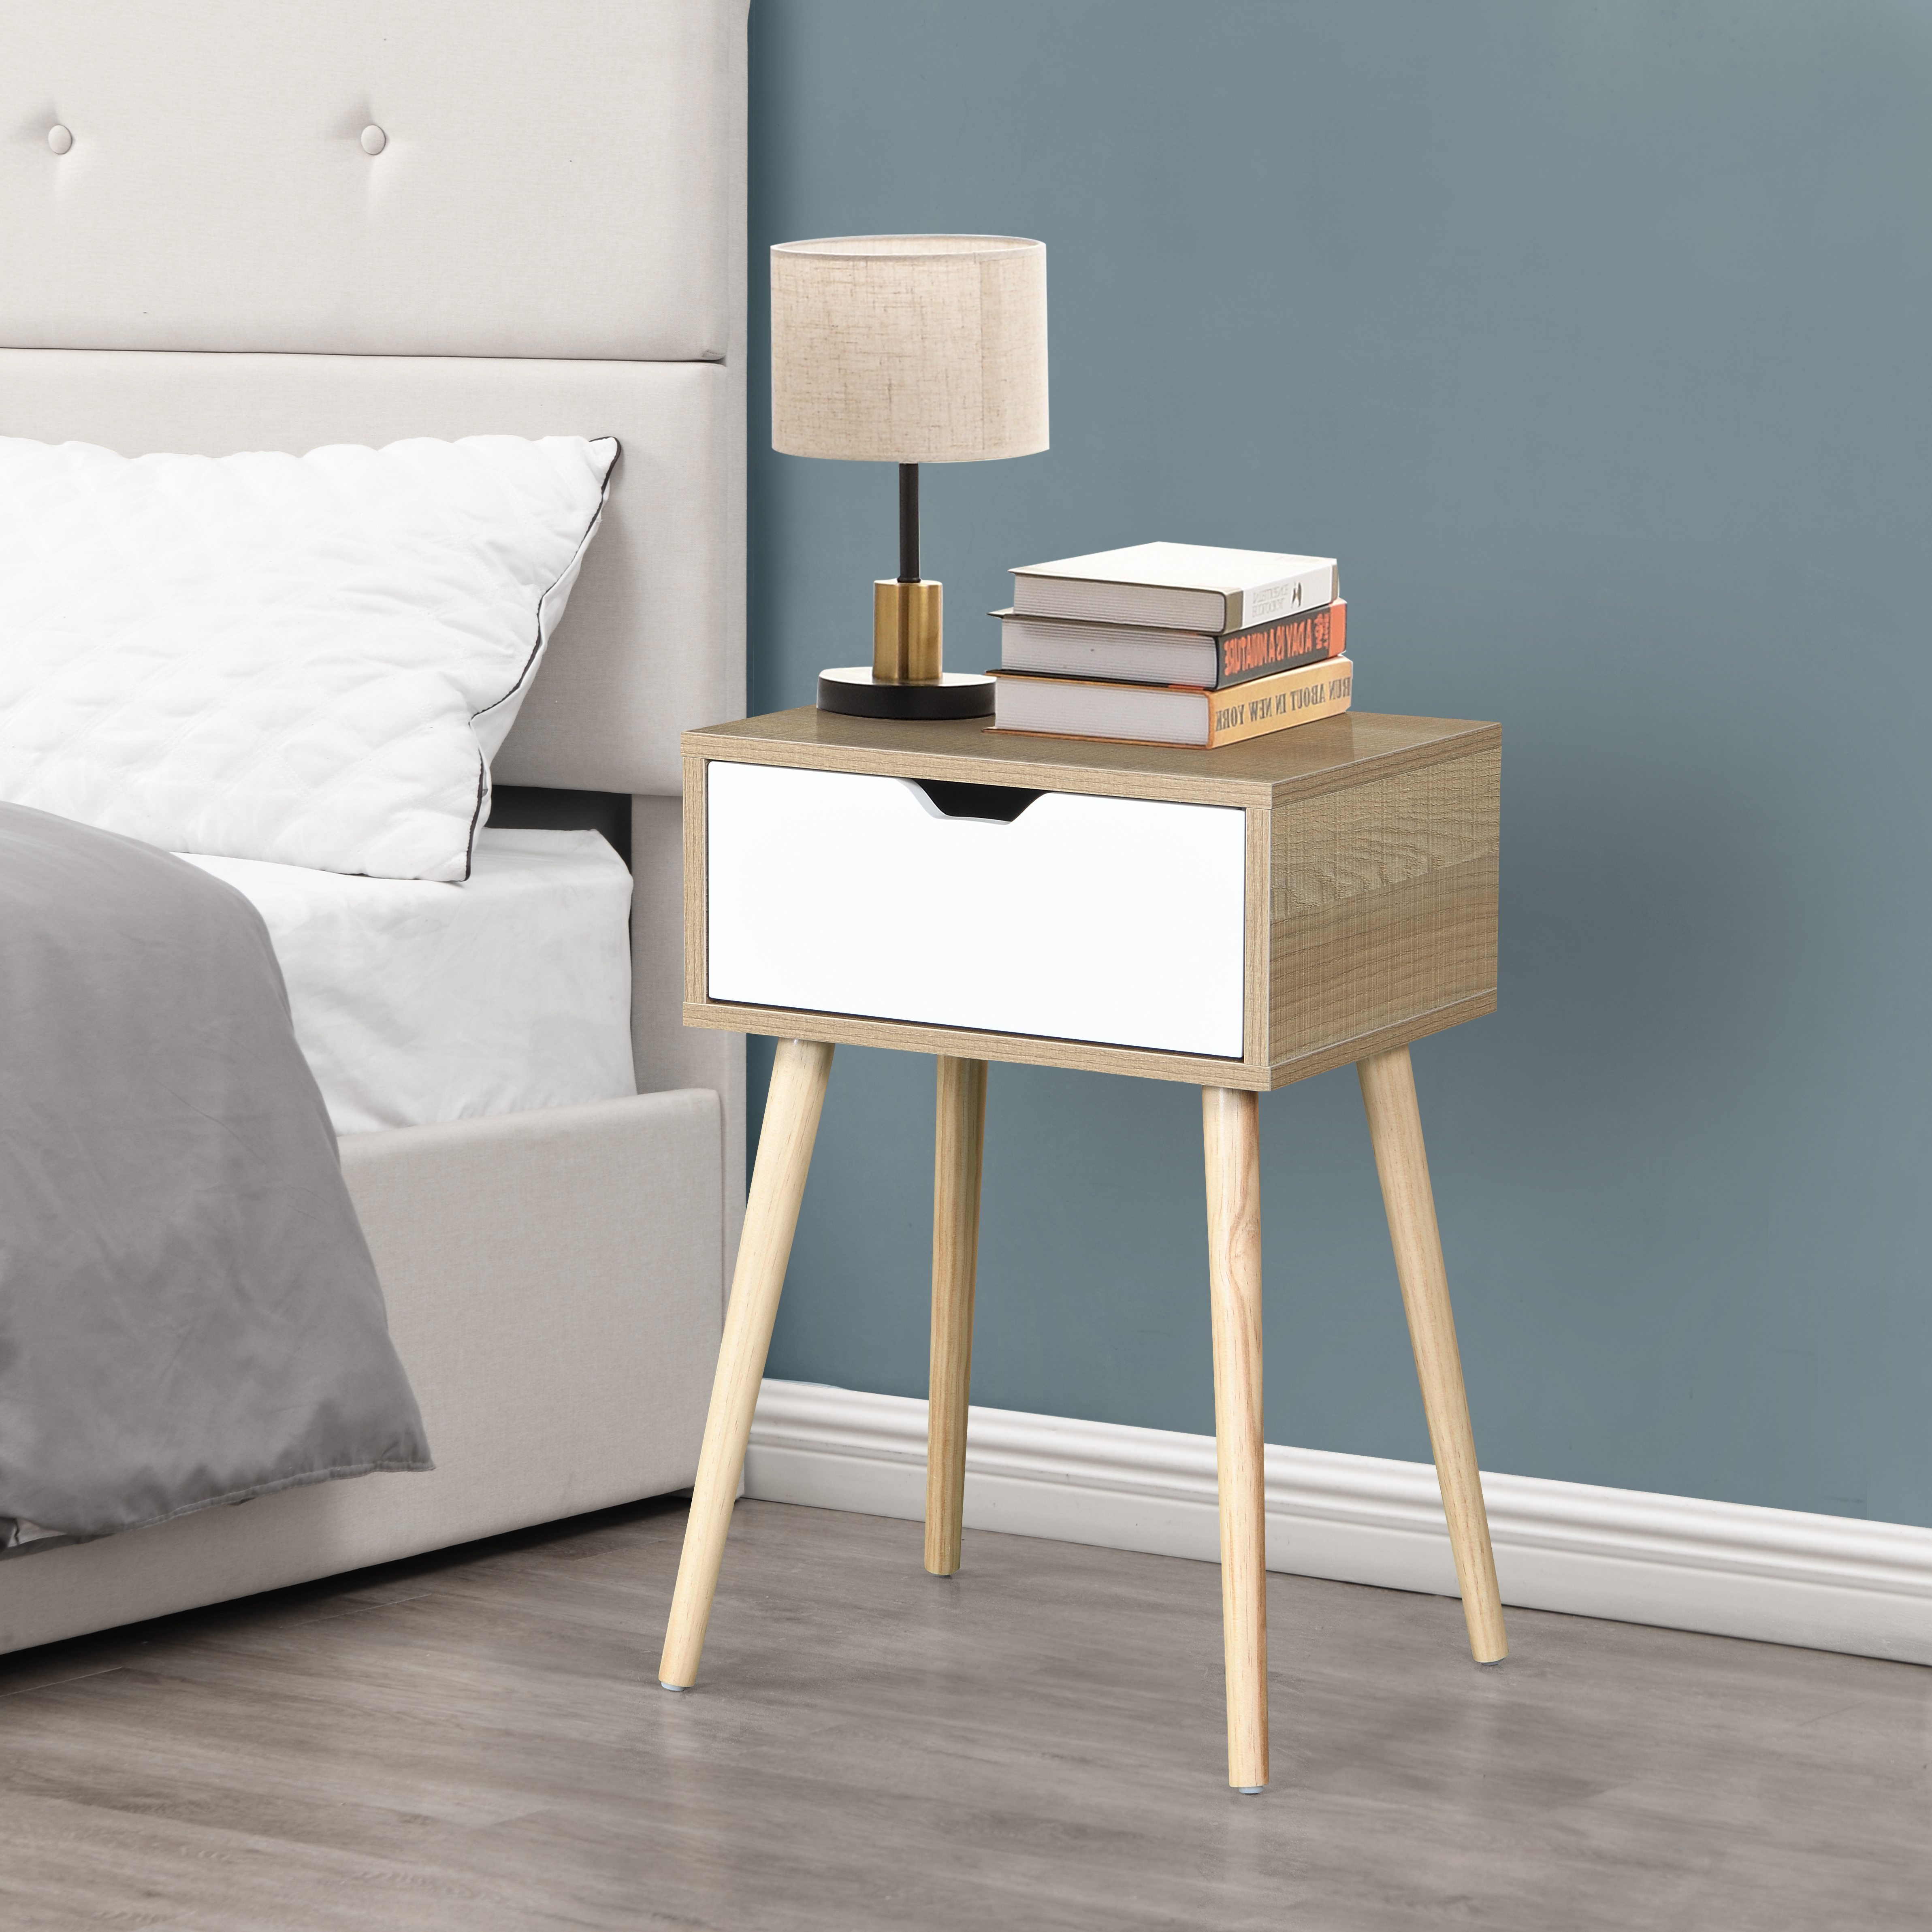 Side Table with 1 Drawer and Rubber Wood Legs, Mid-Century Modern Storage Cabinet for Bedroom Living Room Furniture, White with solid wood color-CASAINC